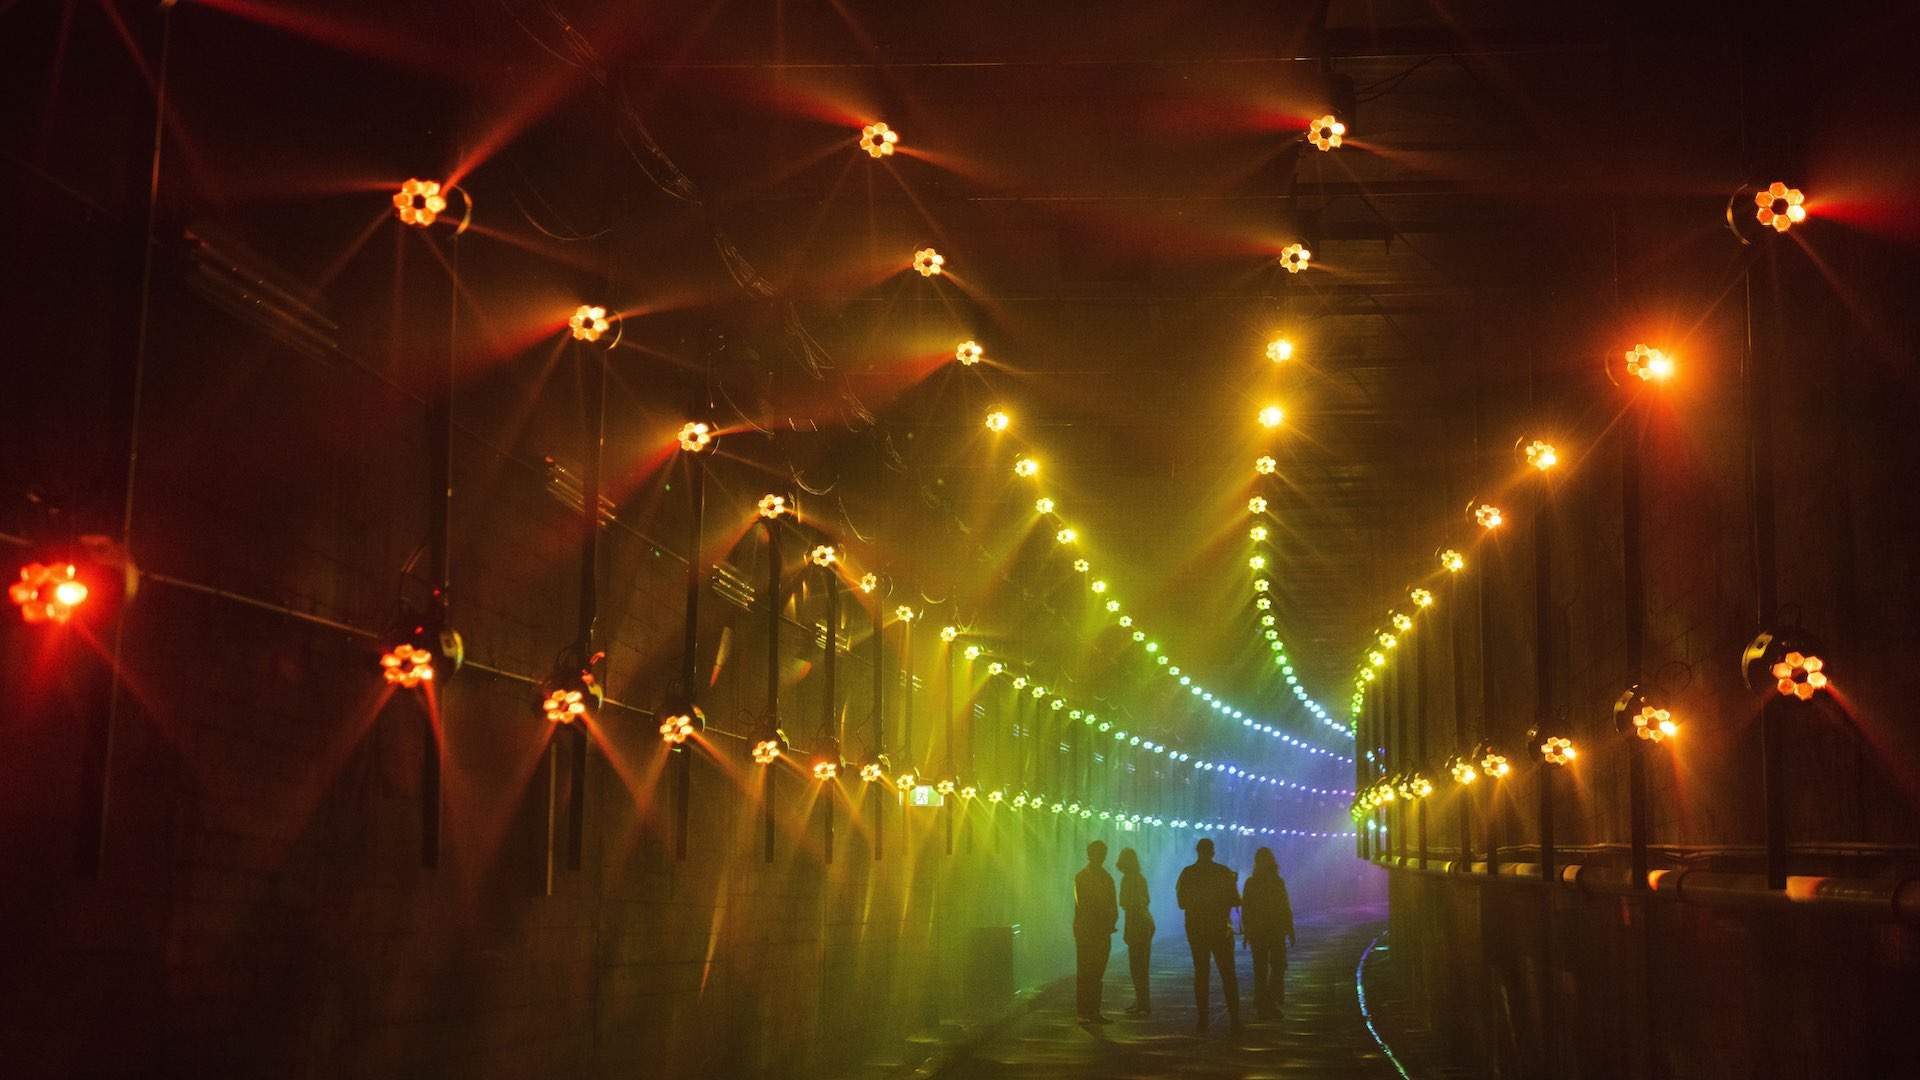 'Dark Spectrum' Is Returning to Vivid to Turn Wynyard's Railway Tunnels Into a Lit-Up Labyrinth for a Second Year